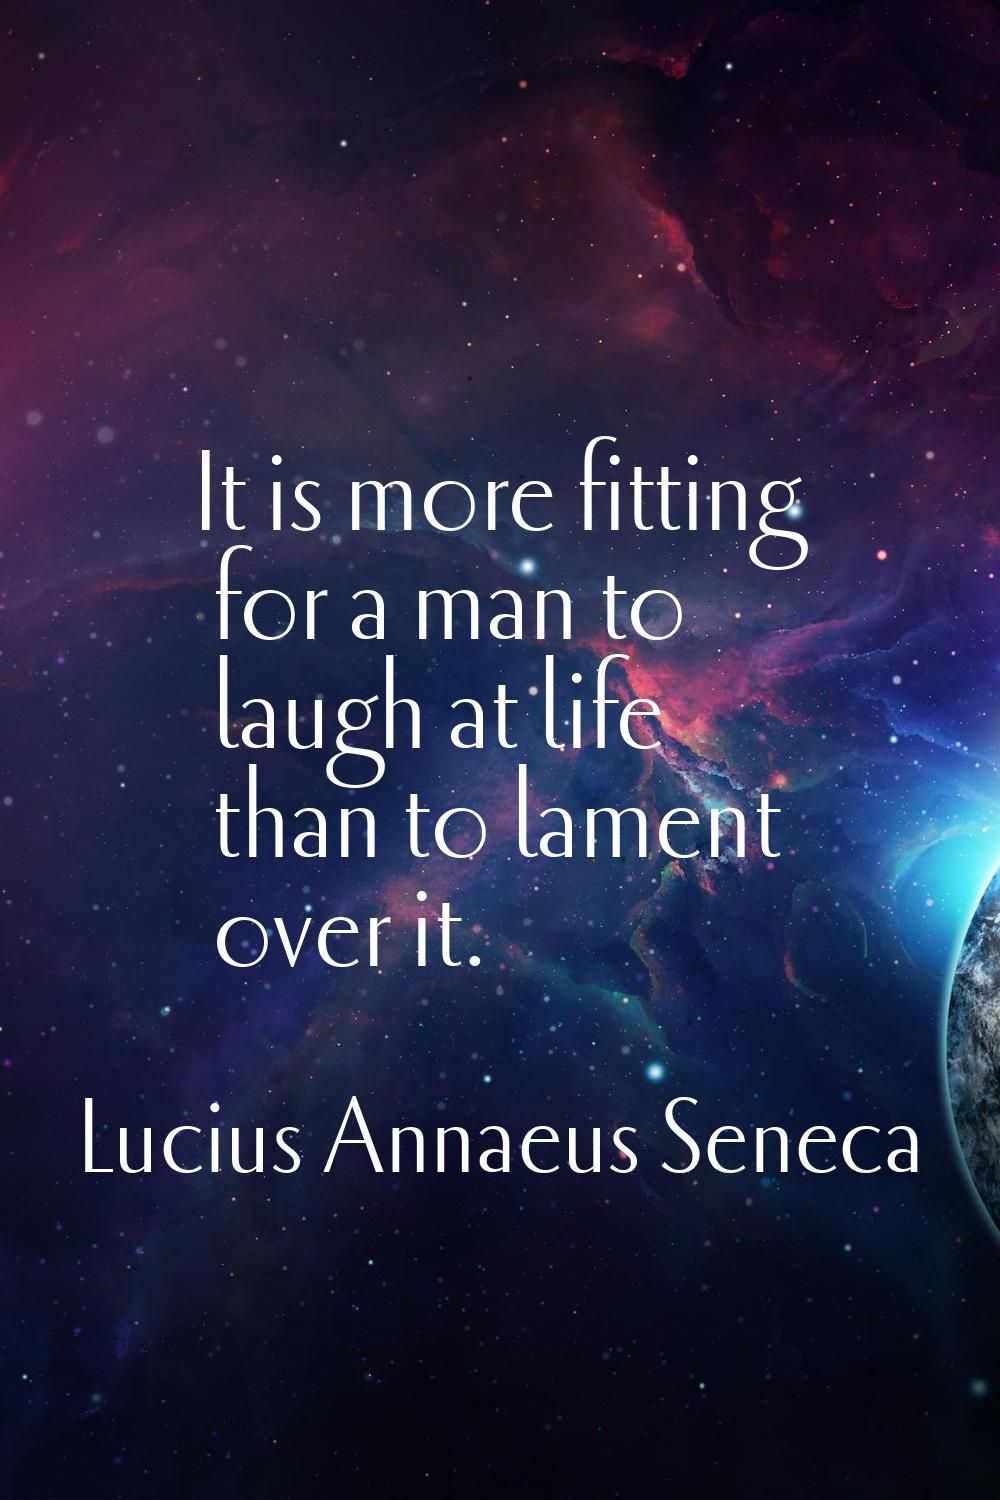 It is more fitting for a man to laugh at life than to lament over it.